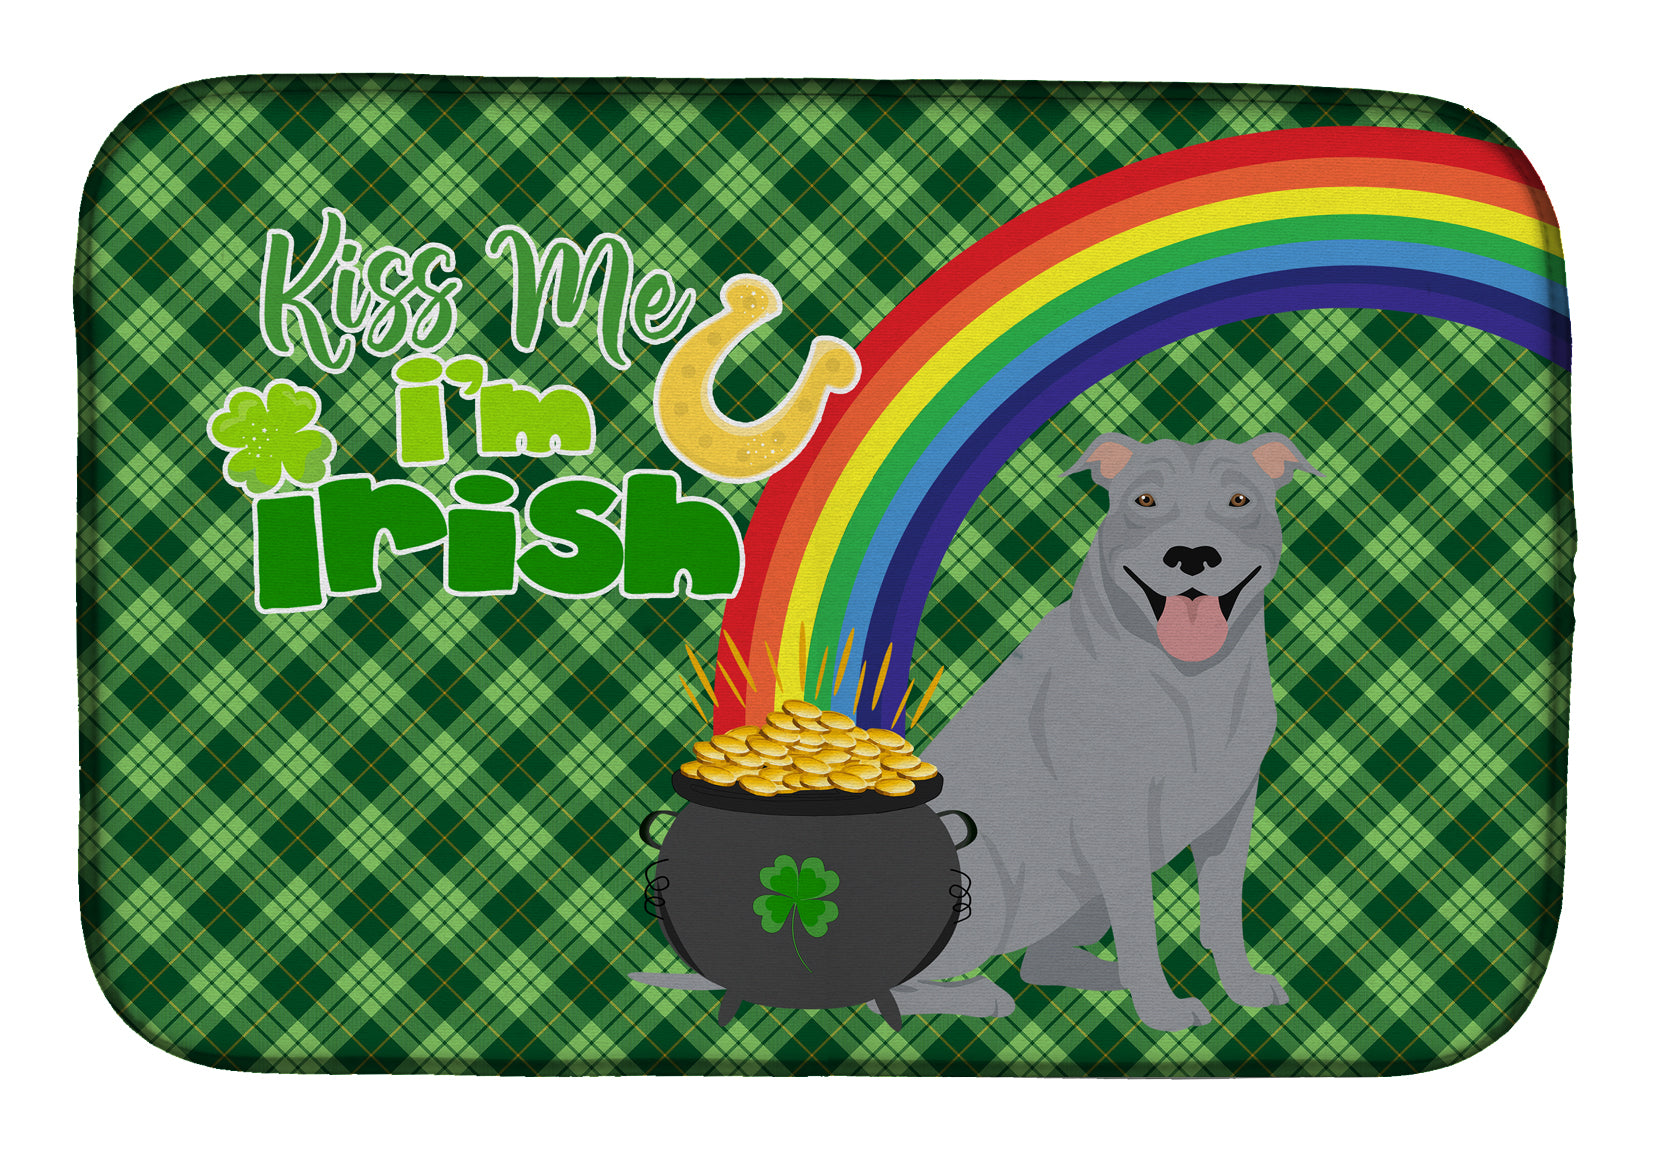 Blue Pit Bull Terrier St. Patrick's Day Dish Drying Mat